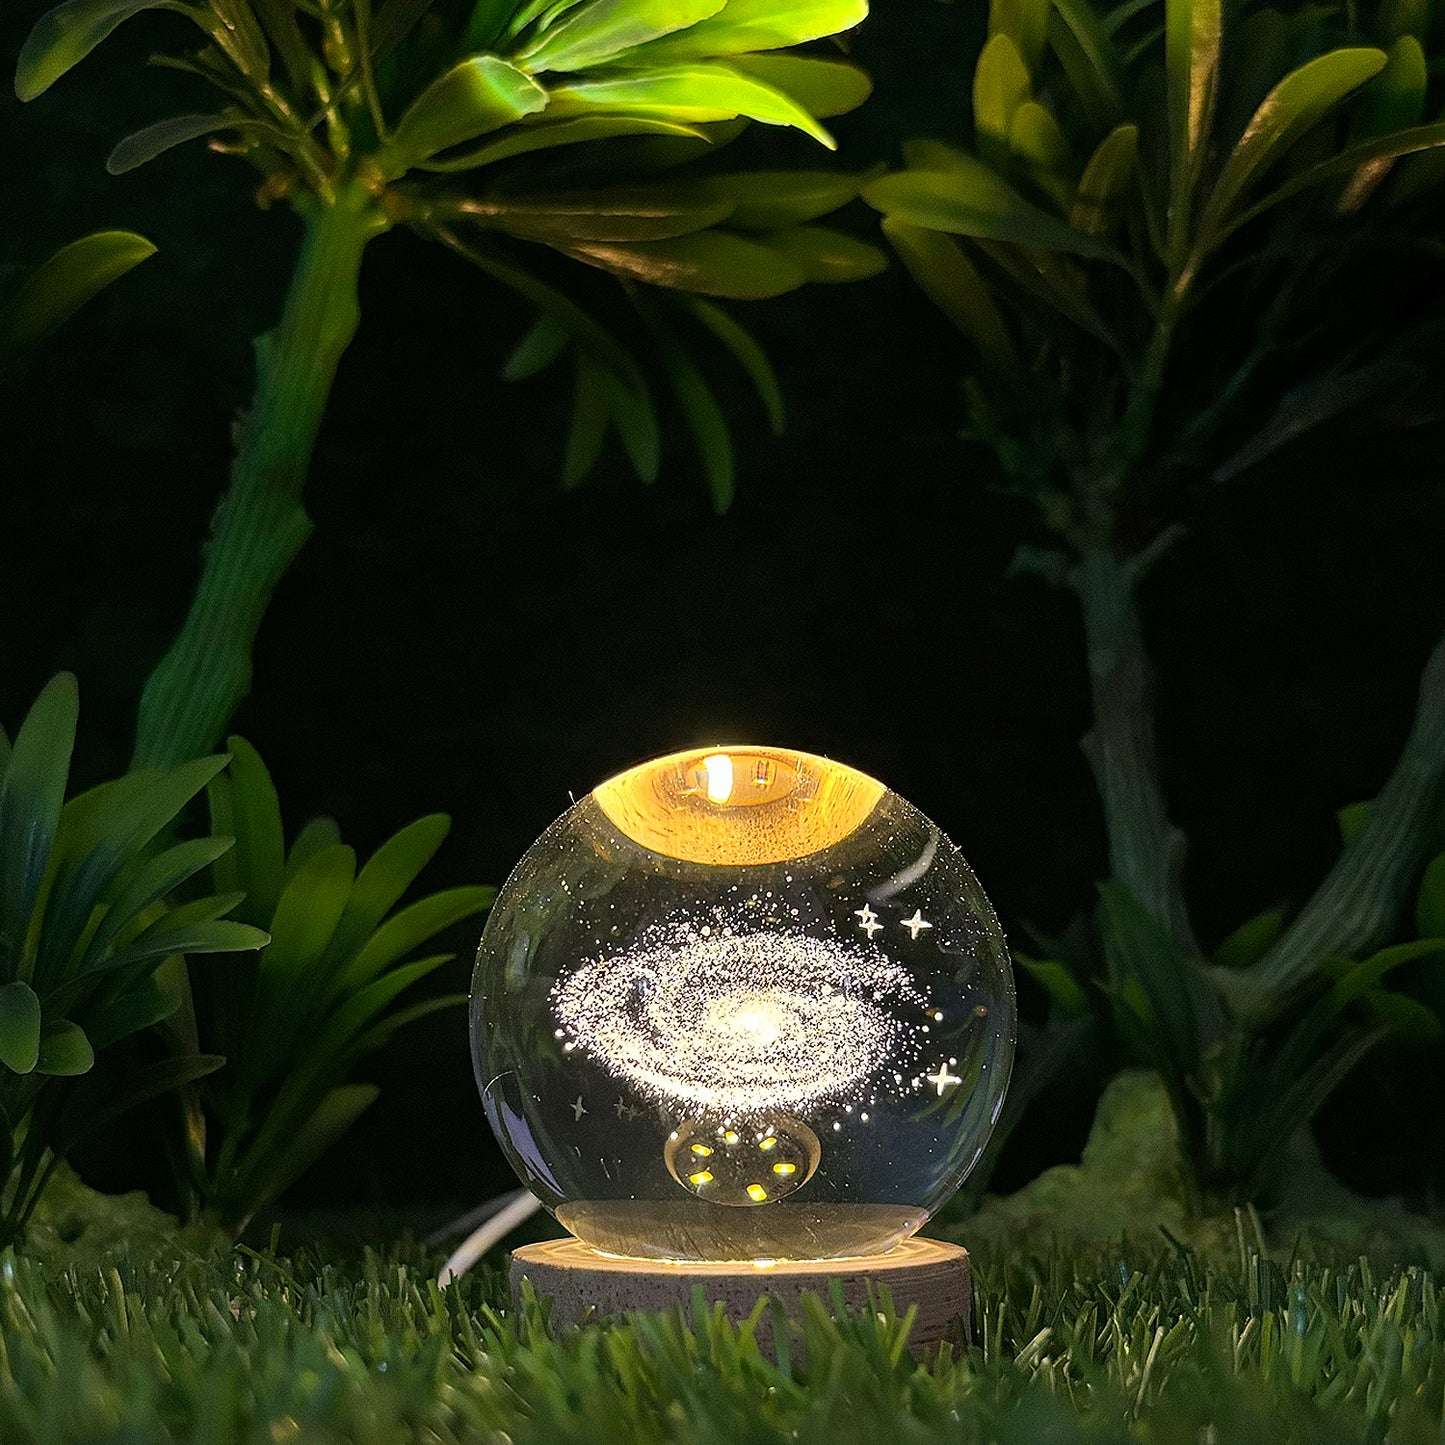 3D Milky Way Crystal Ball Table Night Lamp For Decorate Home Rooms / Bedroom / Office / Studio Etc